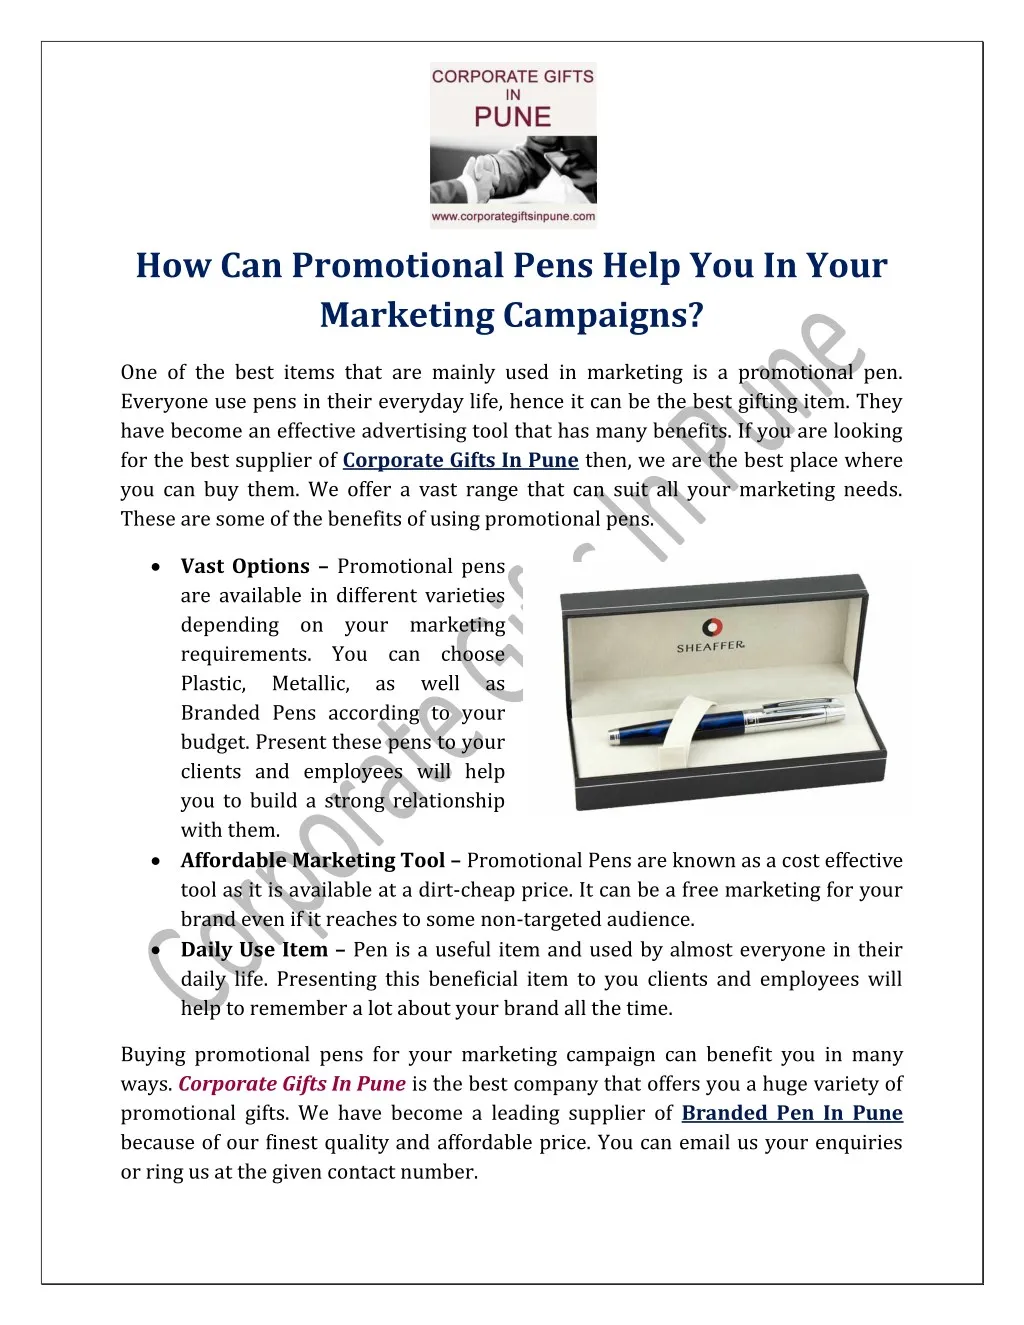 how can promotional pens help you in your